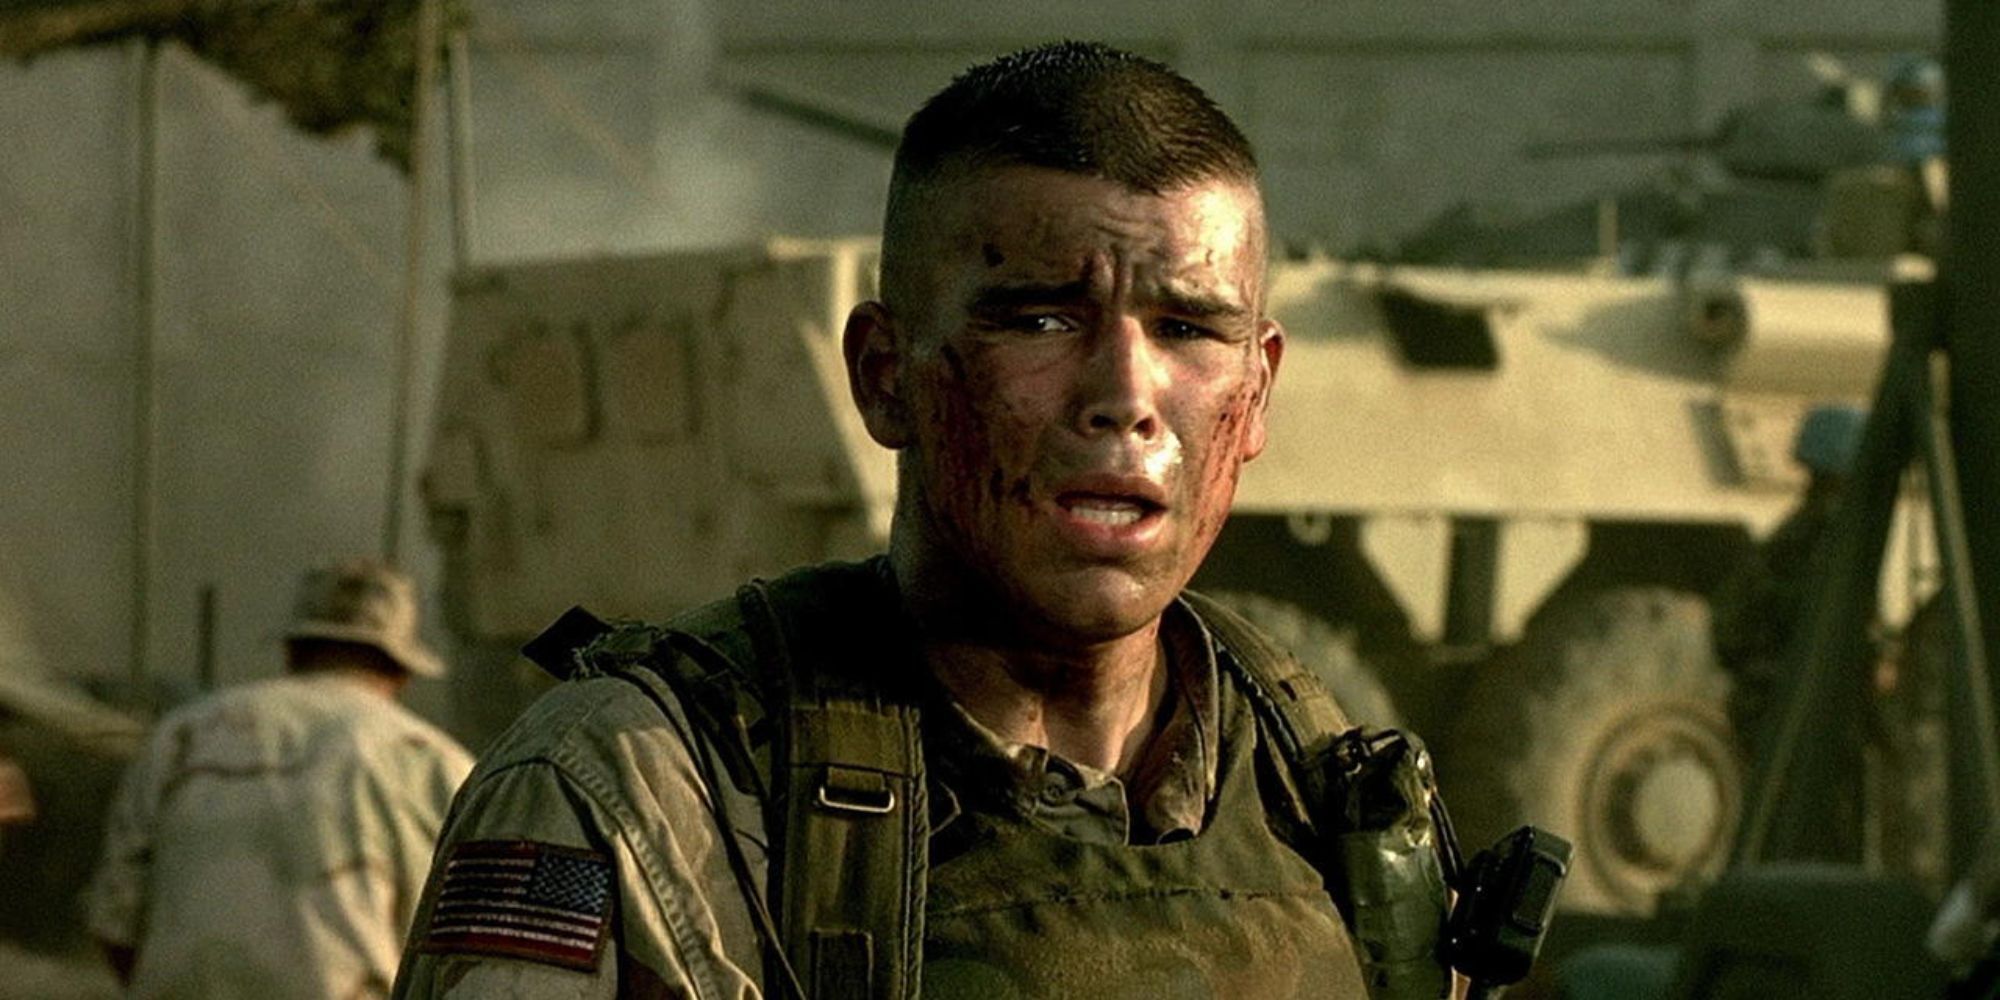 An army sergeant with a bloodied face looks distraught as he stands in a military compound.